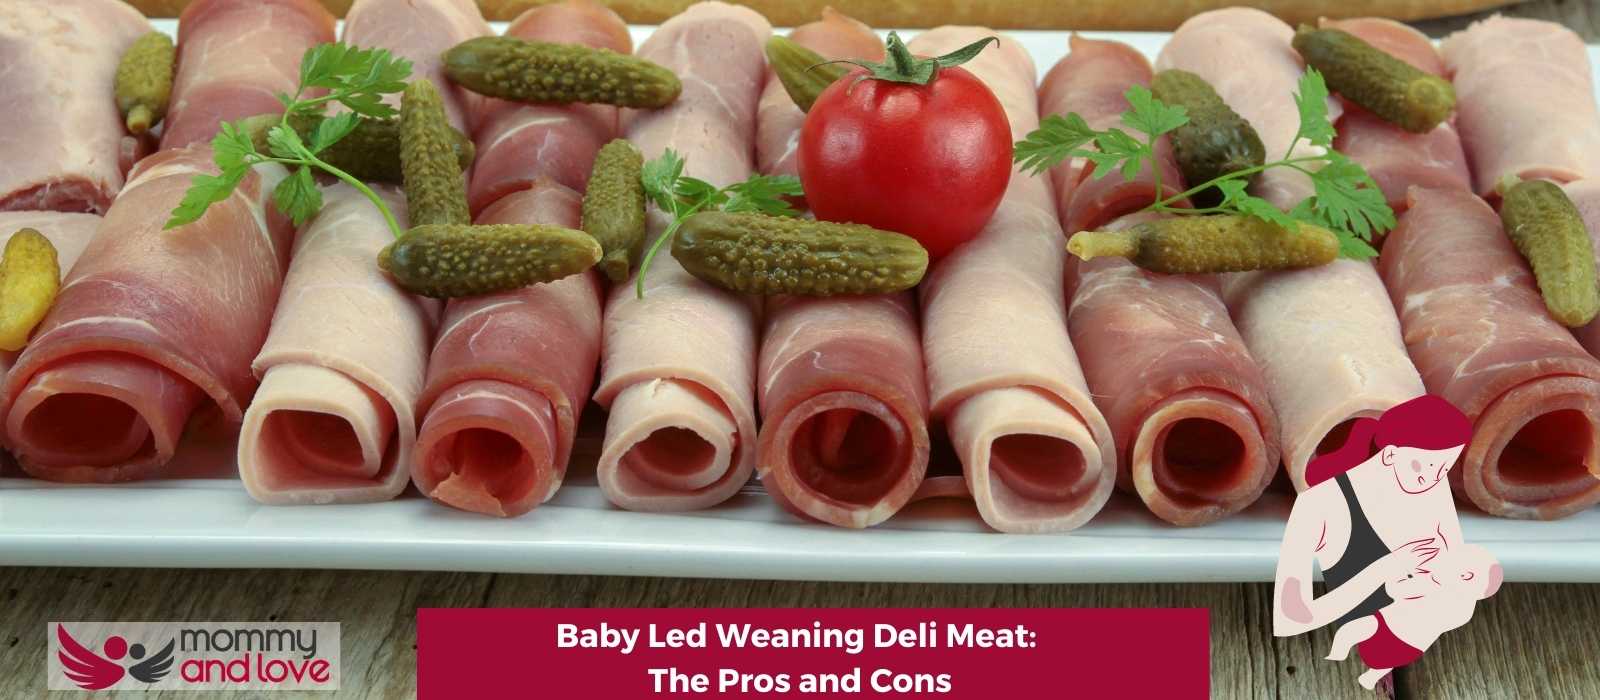 Baby Led Weaning Deli Meat The Pros and Cons